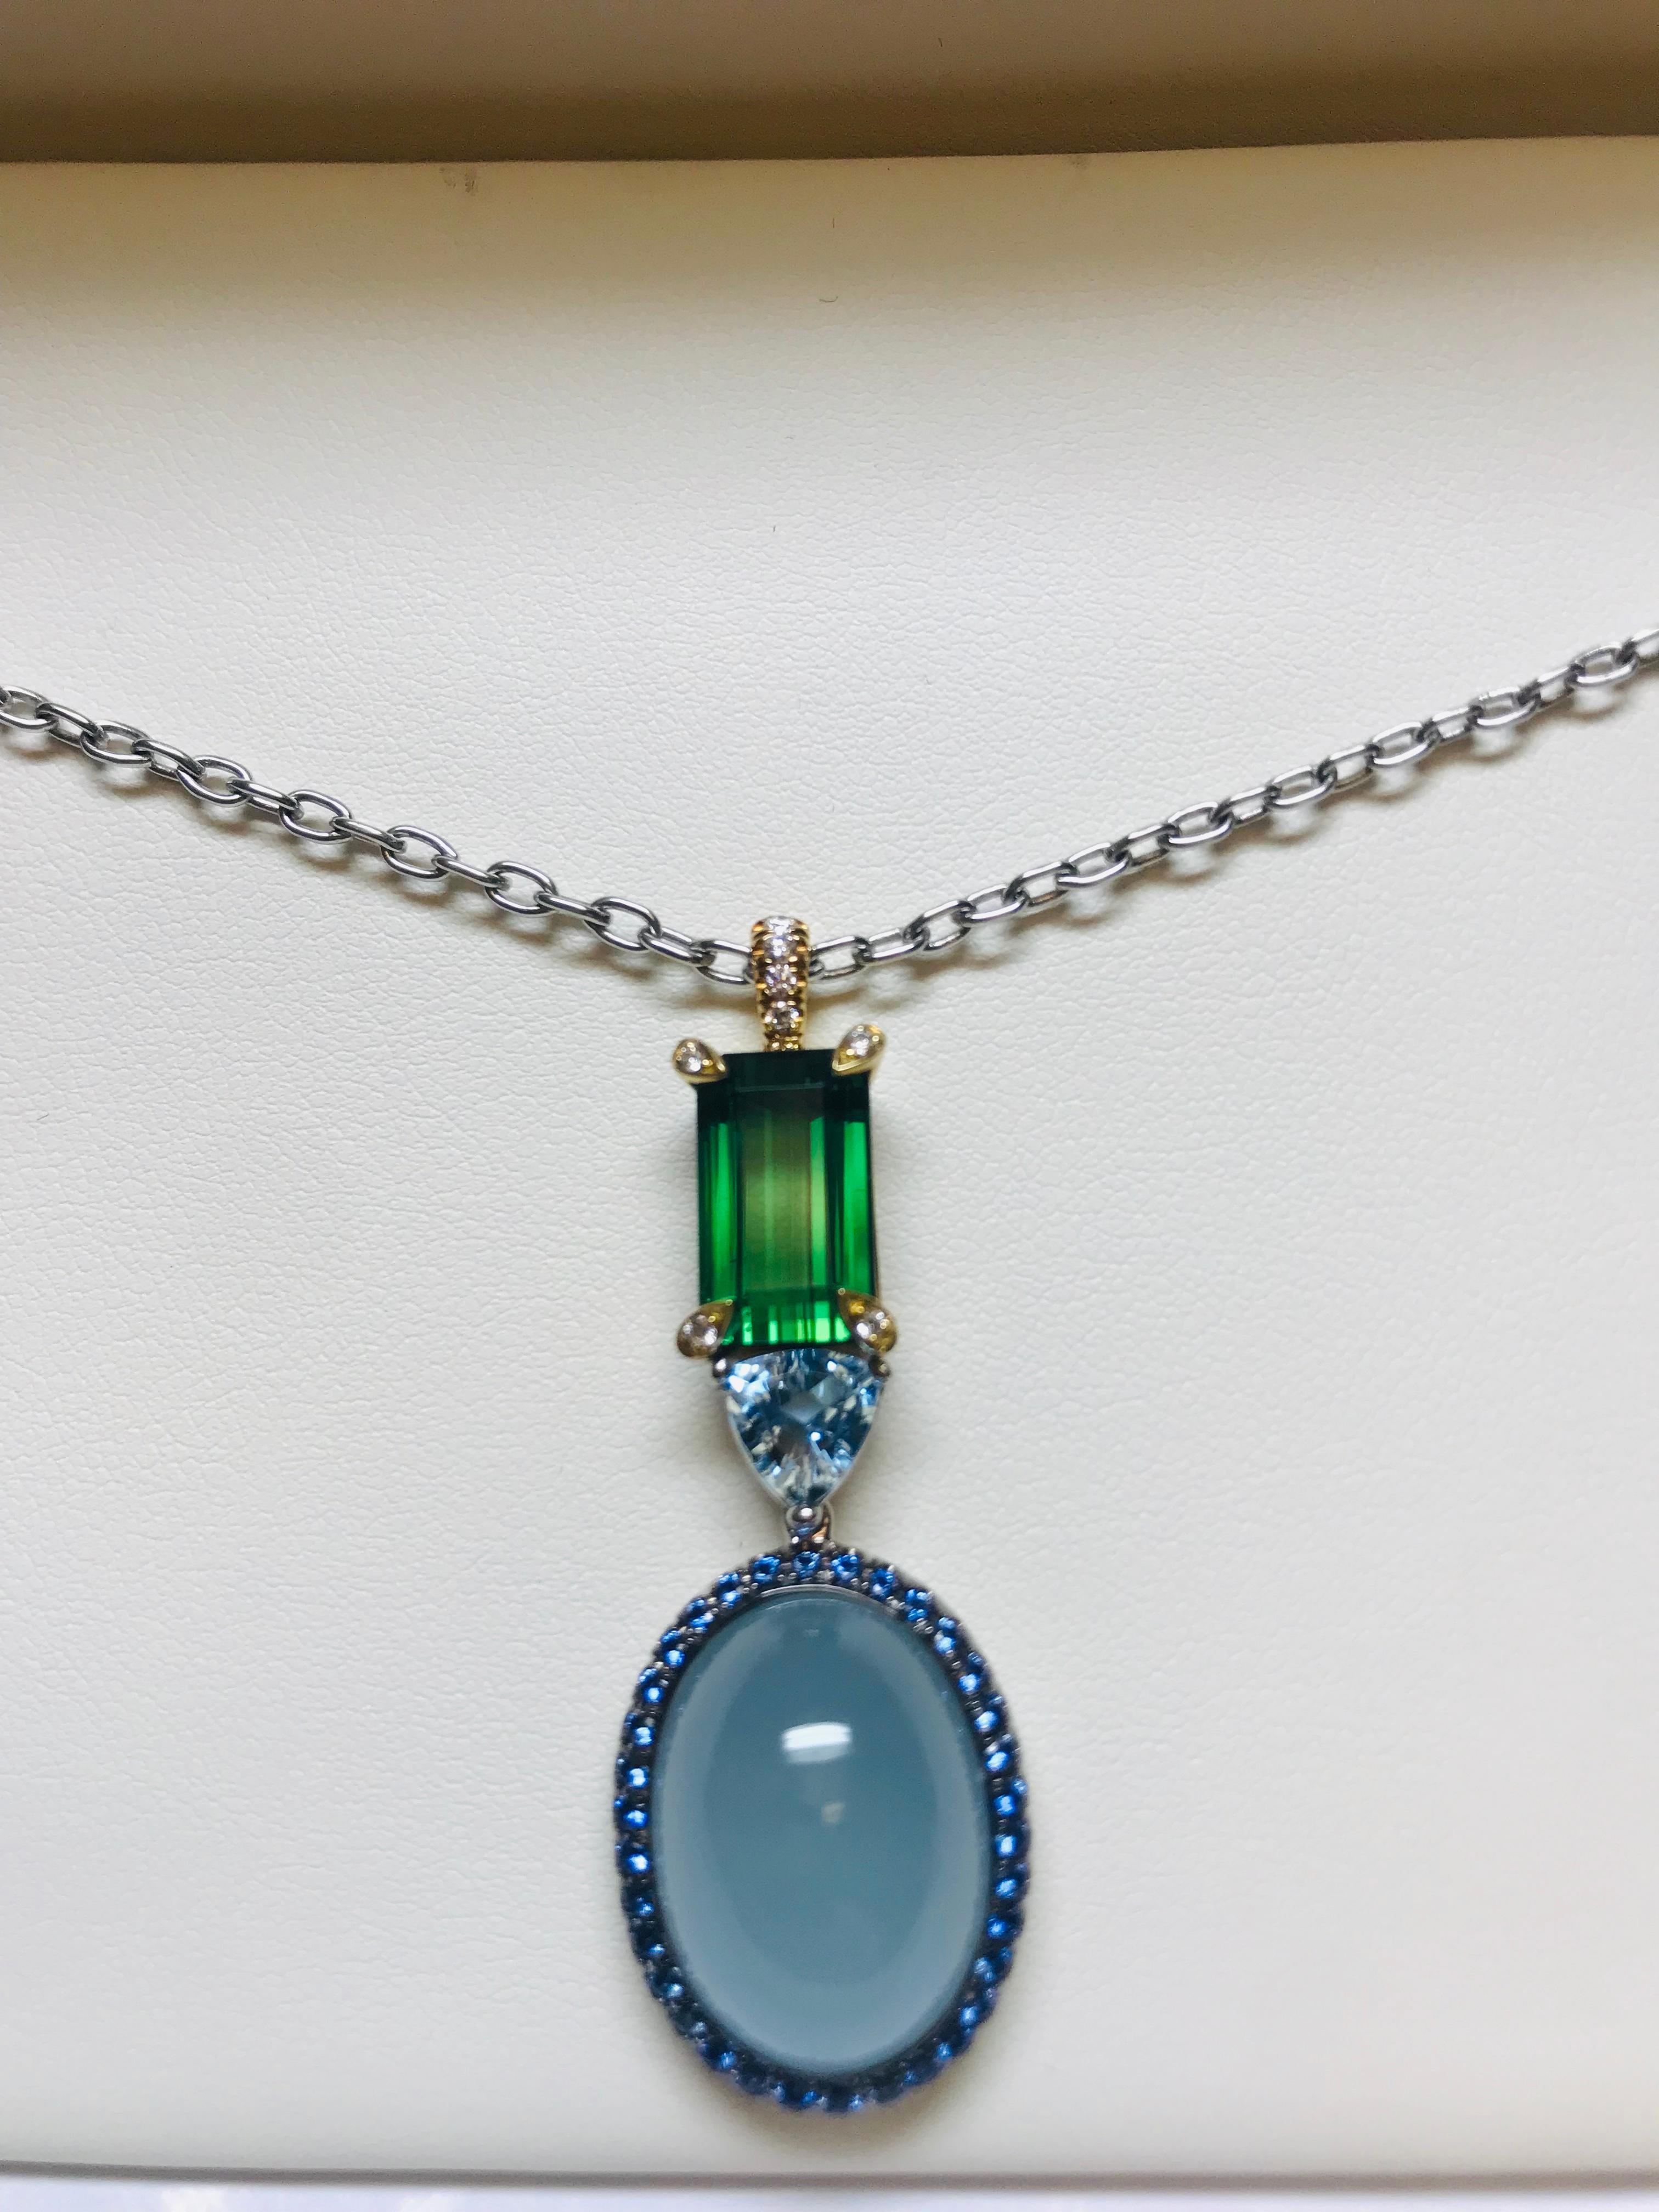 The incredible combination of colors in this pendant really make it stand out as a signature necklace. The oval cabochon cut Aquamarine surrounded by .61 carats of cornflower blue sapphires highlight the piece, with the 1.03 carat trillion cut